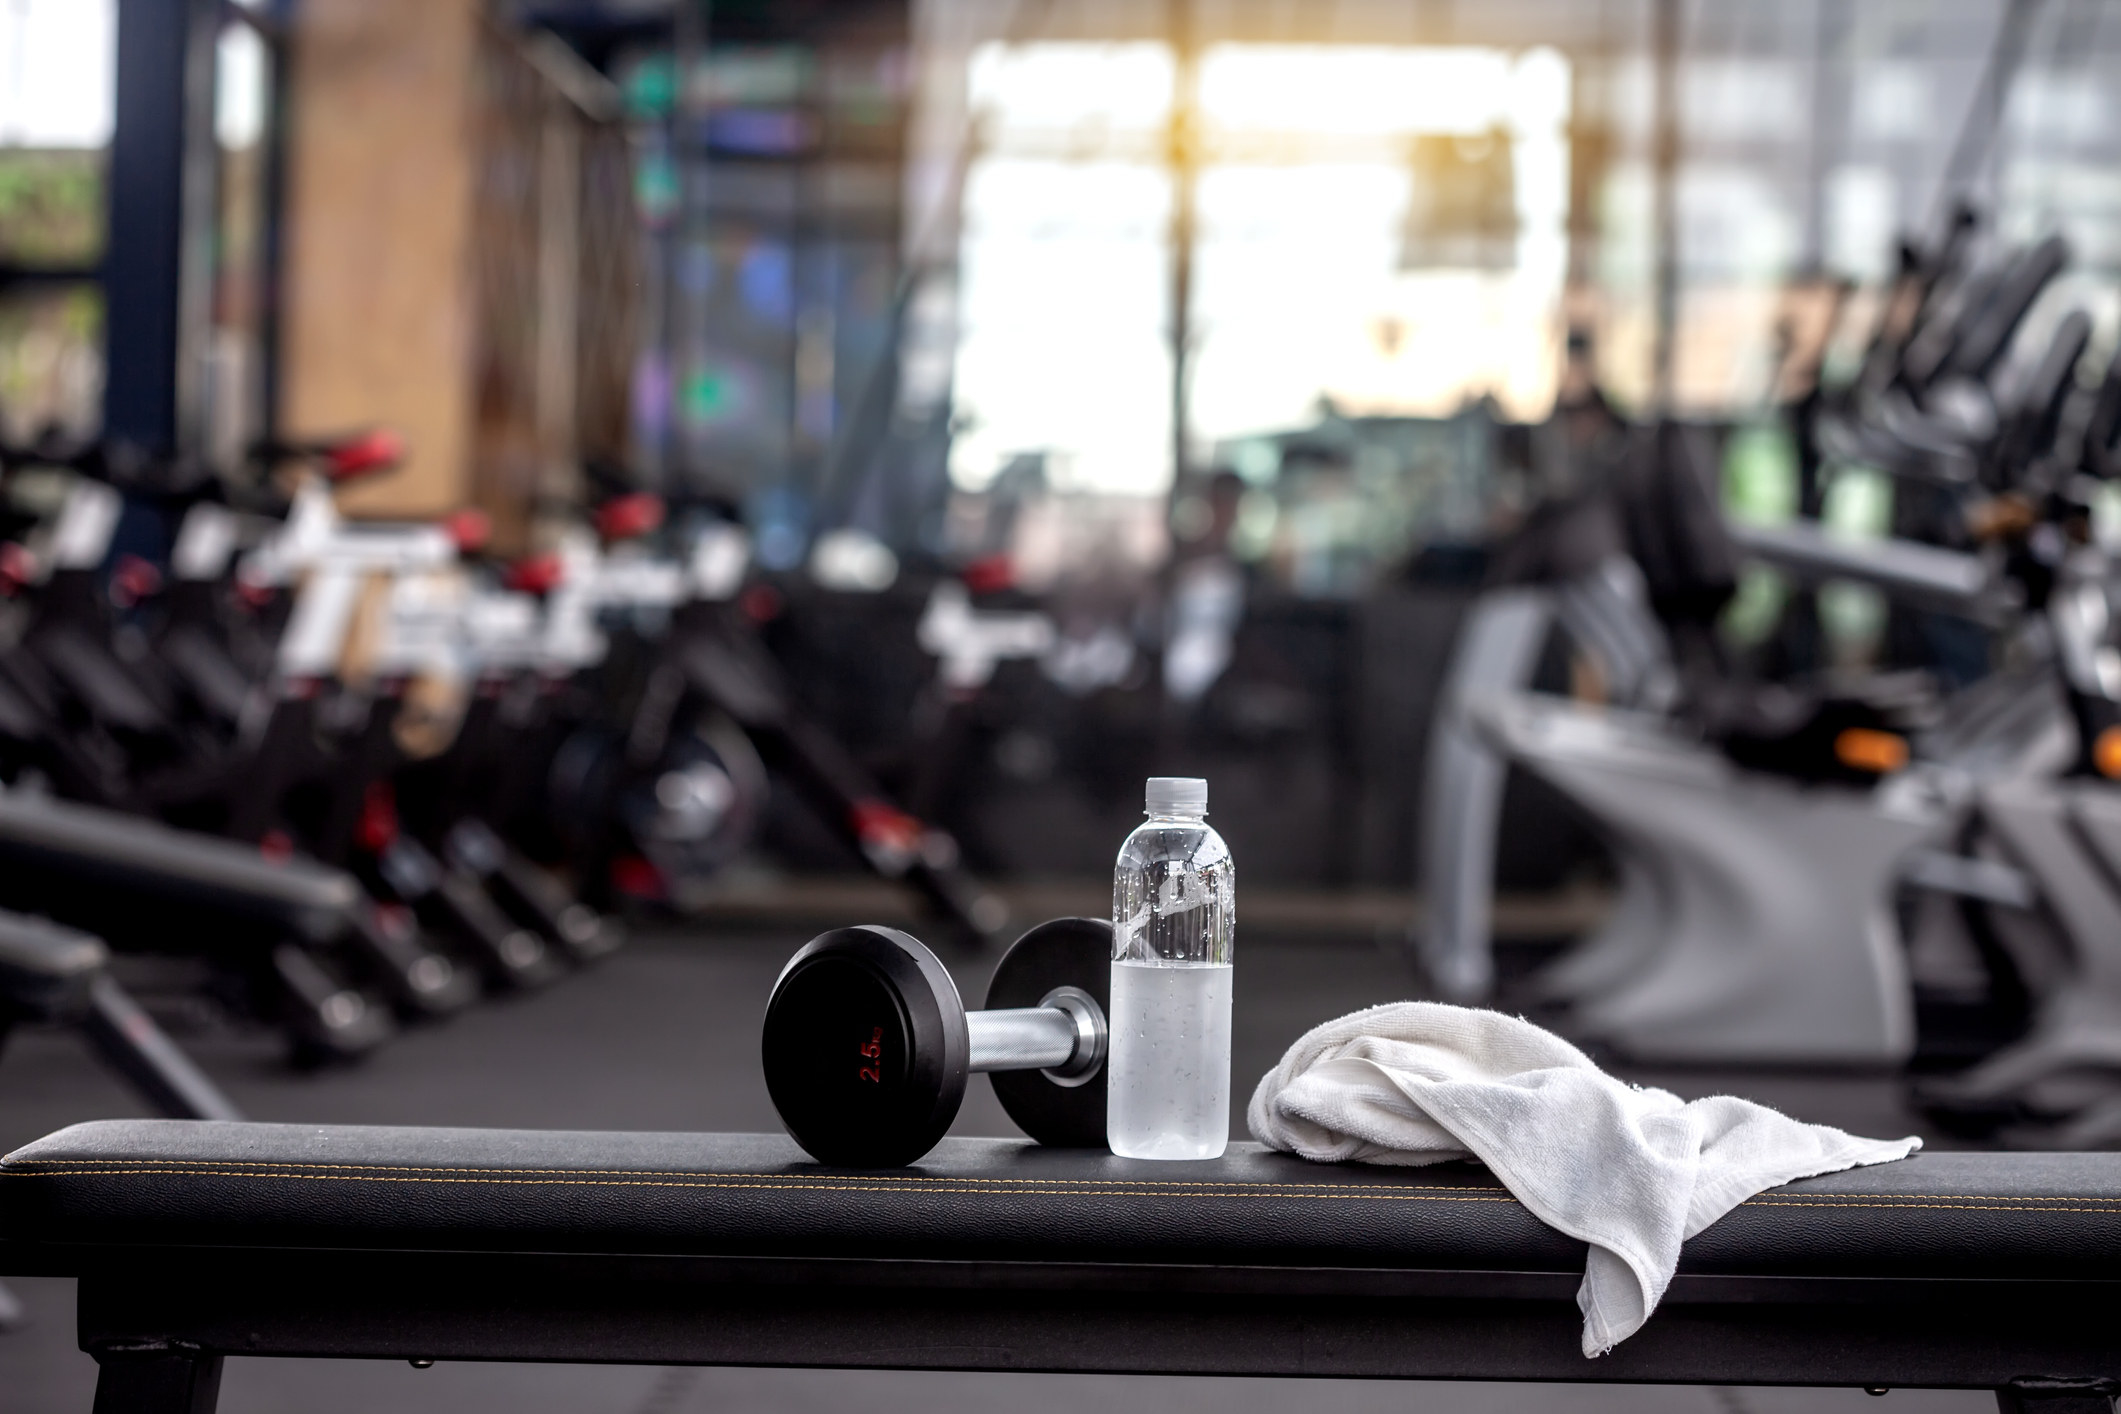 A towel, bottle of water, and weight on a gym bench